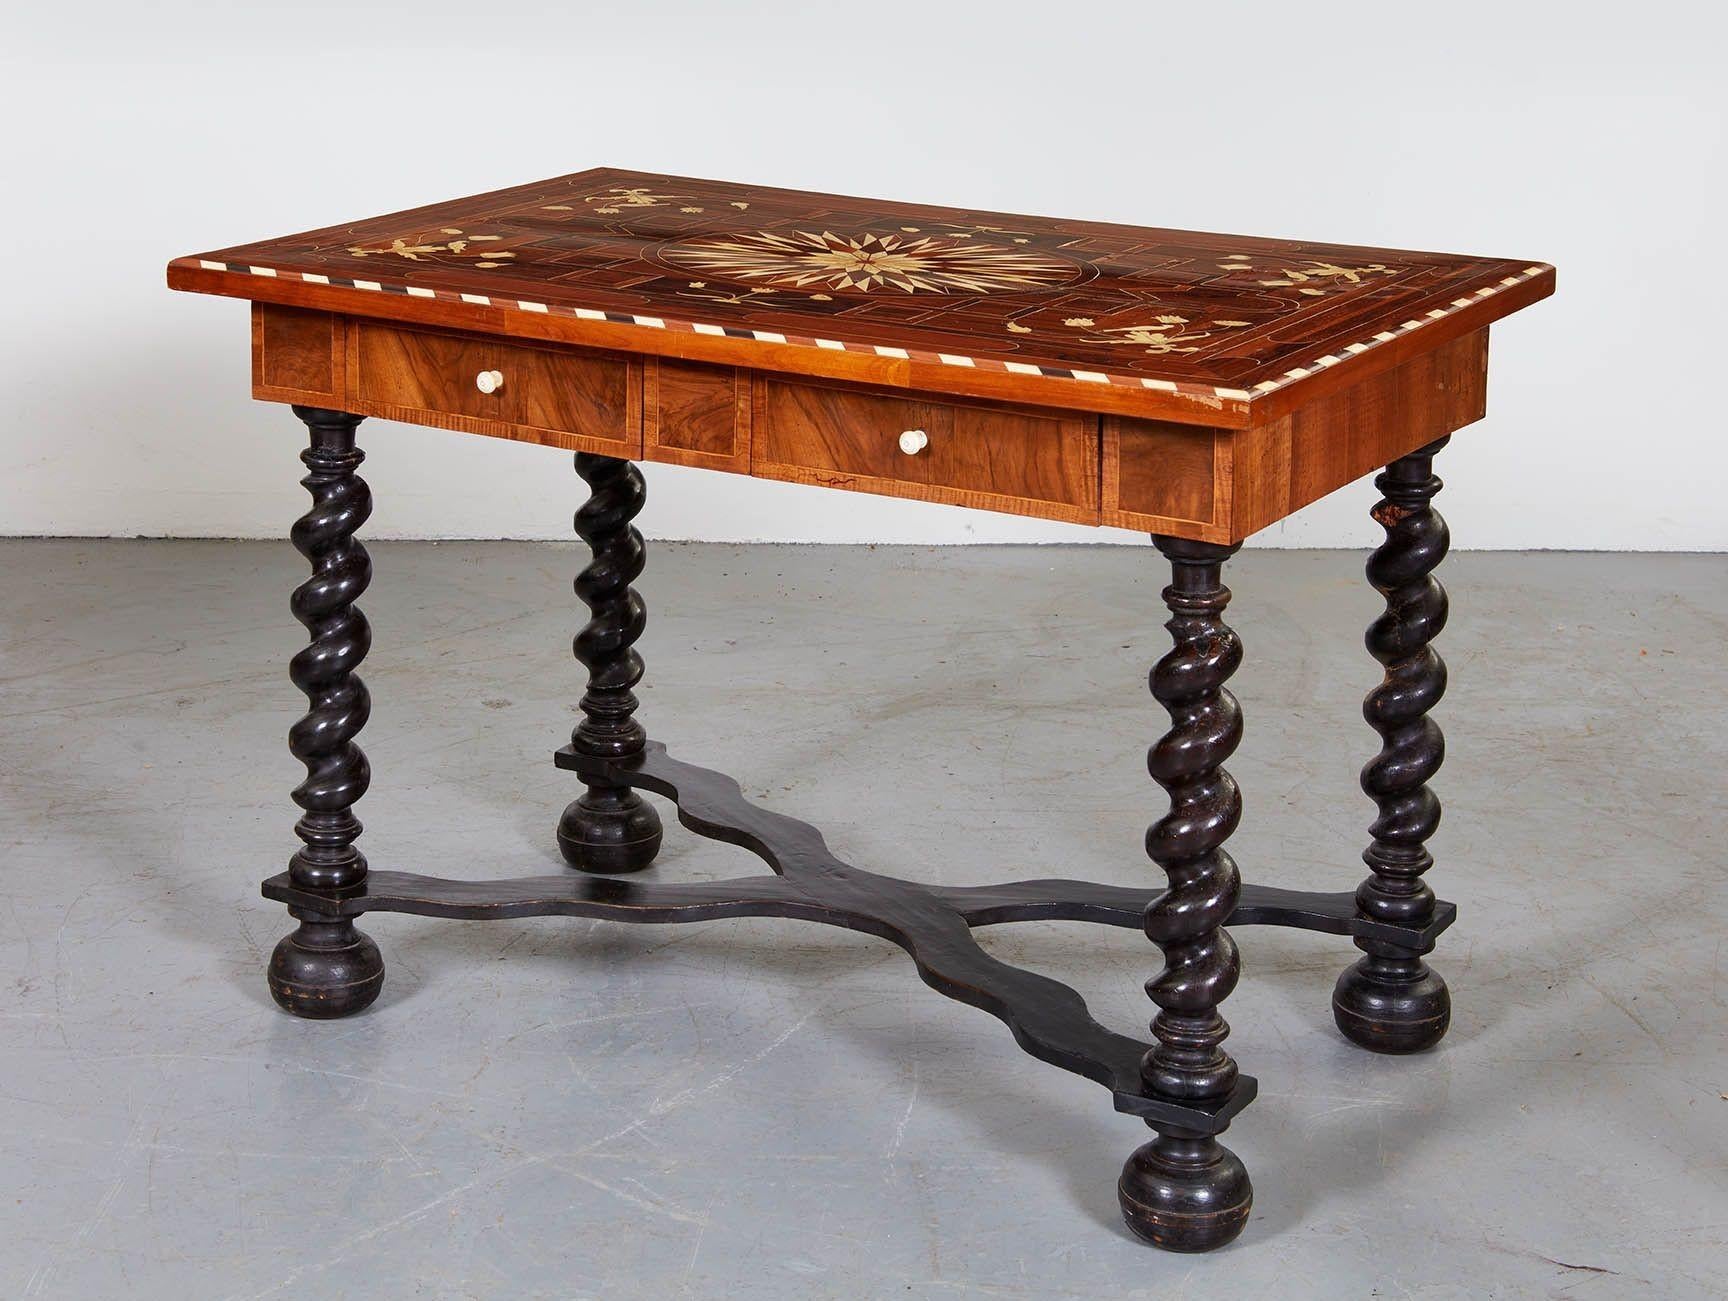 Good 19th Century Flemish baroque bone inlaid rosewood, walnut and ebonized wood center table, the top with inlaid starburst on a geometric marquetry ground, the corners inlaid with flowering urns with birds on the branches, over single drawer with